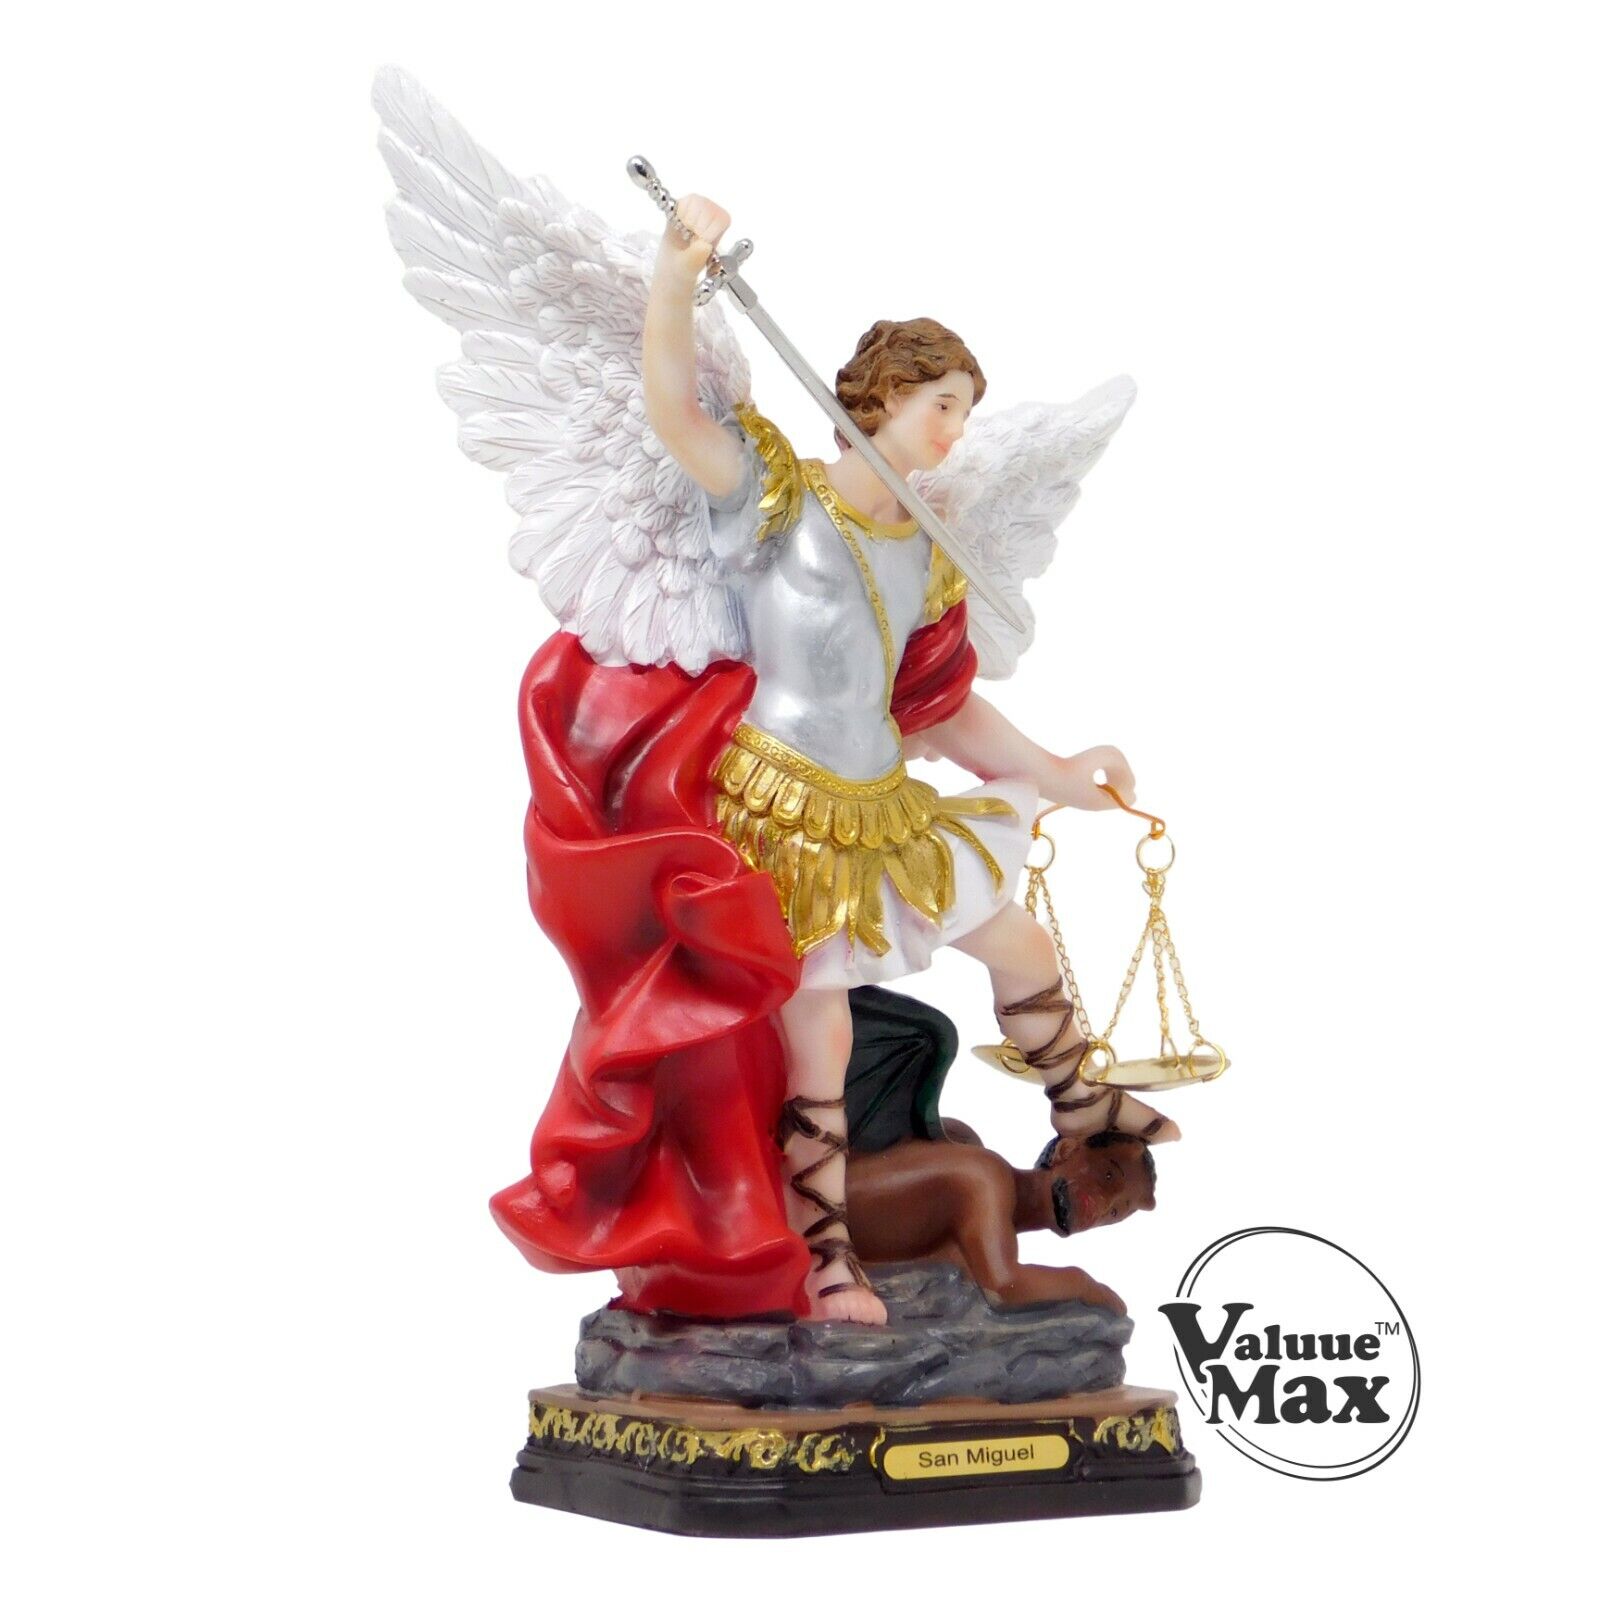 ValuueMax™ Saint Michael Archangel Statue, Finely Detailed Resin, 8 Inch Tall